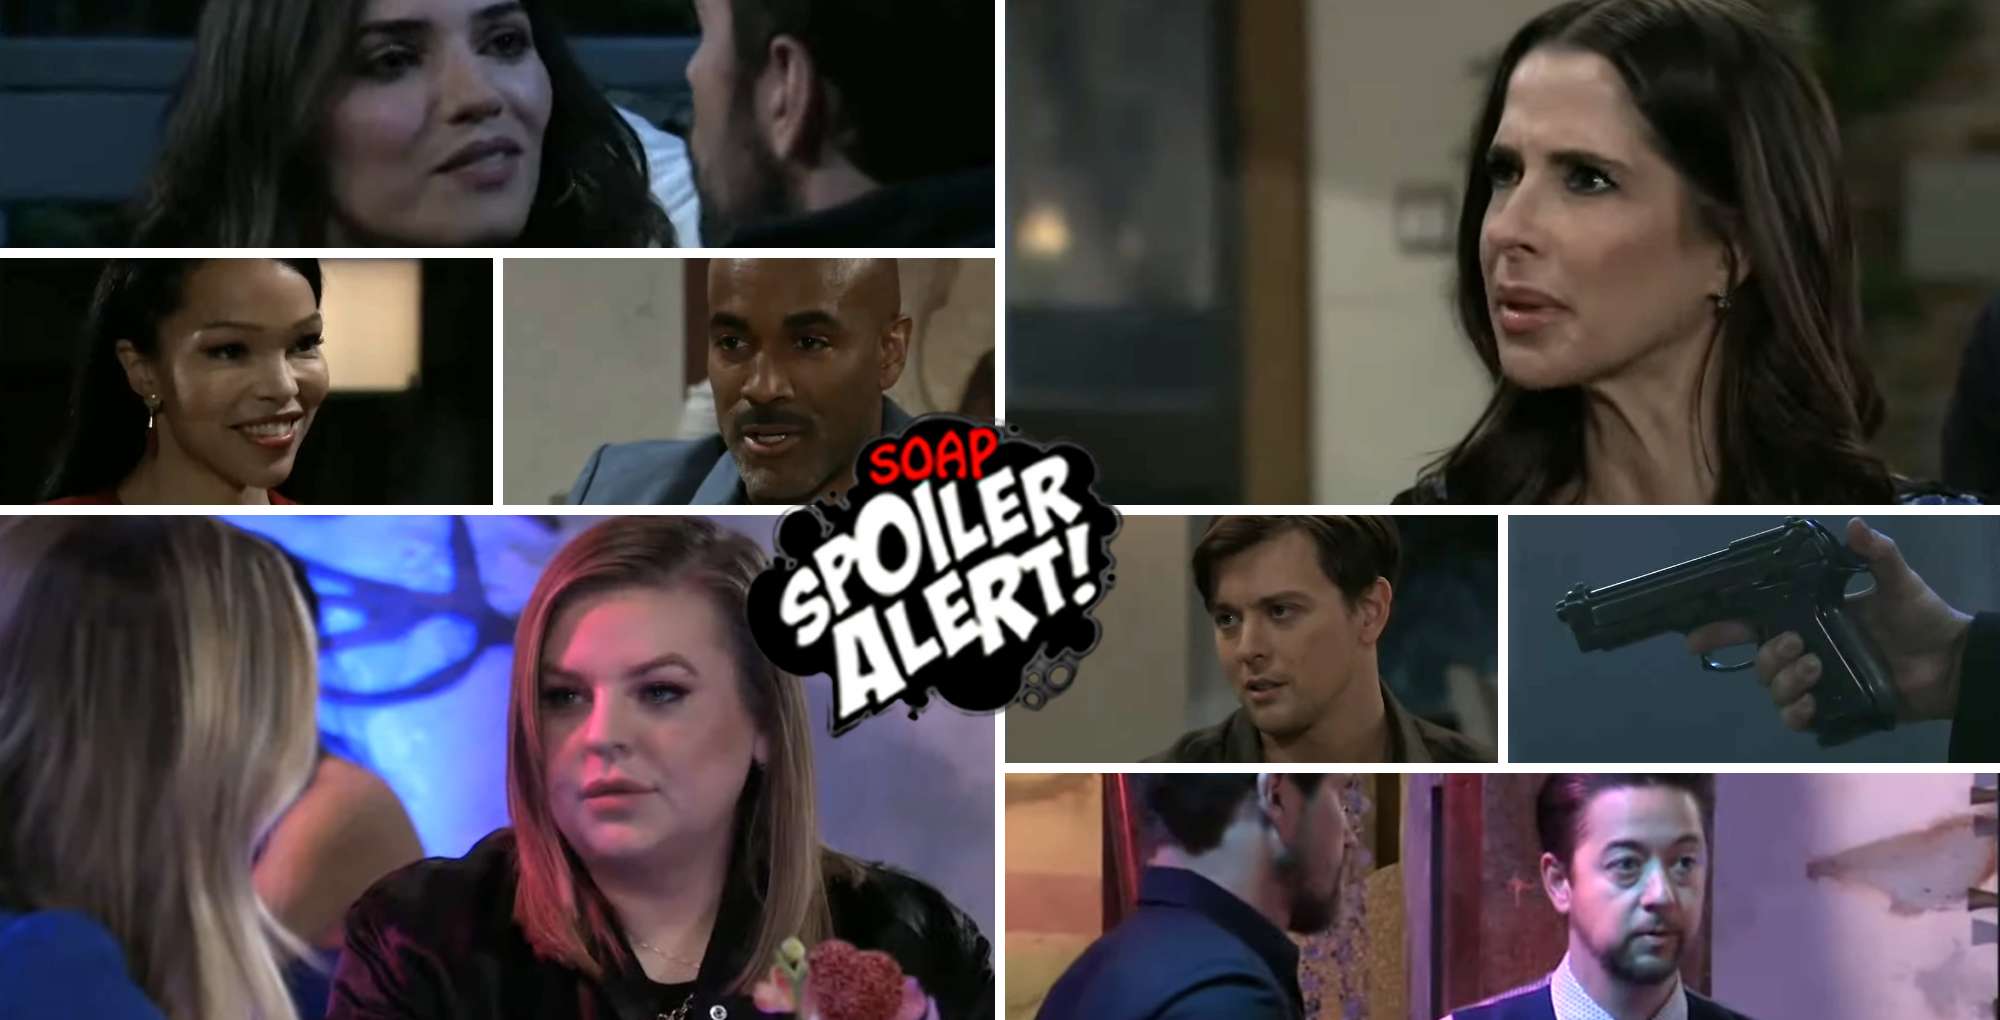 general hospital preview video collage february 14.